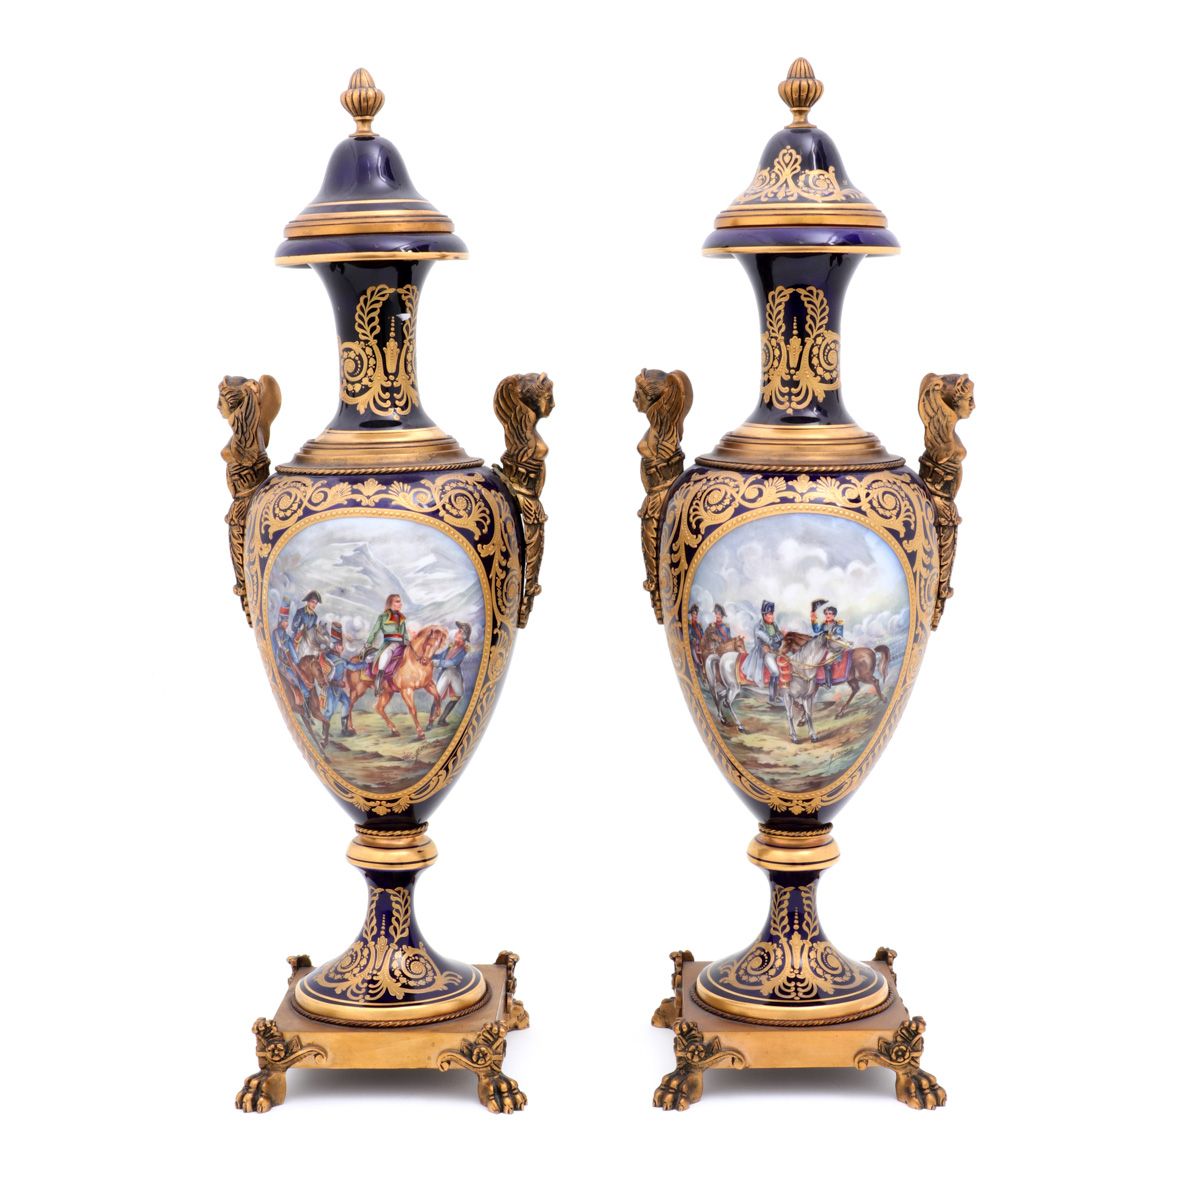 A PAIR OF URNS A PAIR OF URNS Sèvres style porcelain, with four cartouches depic&hellip;